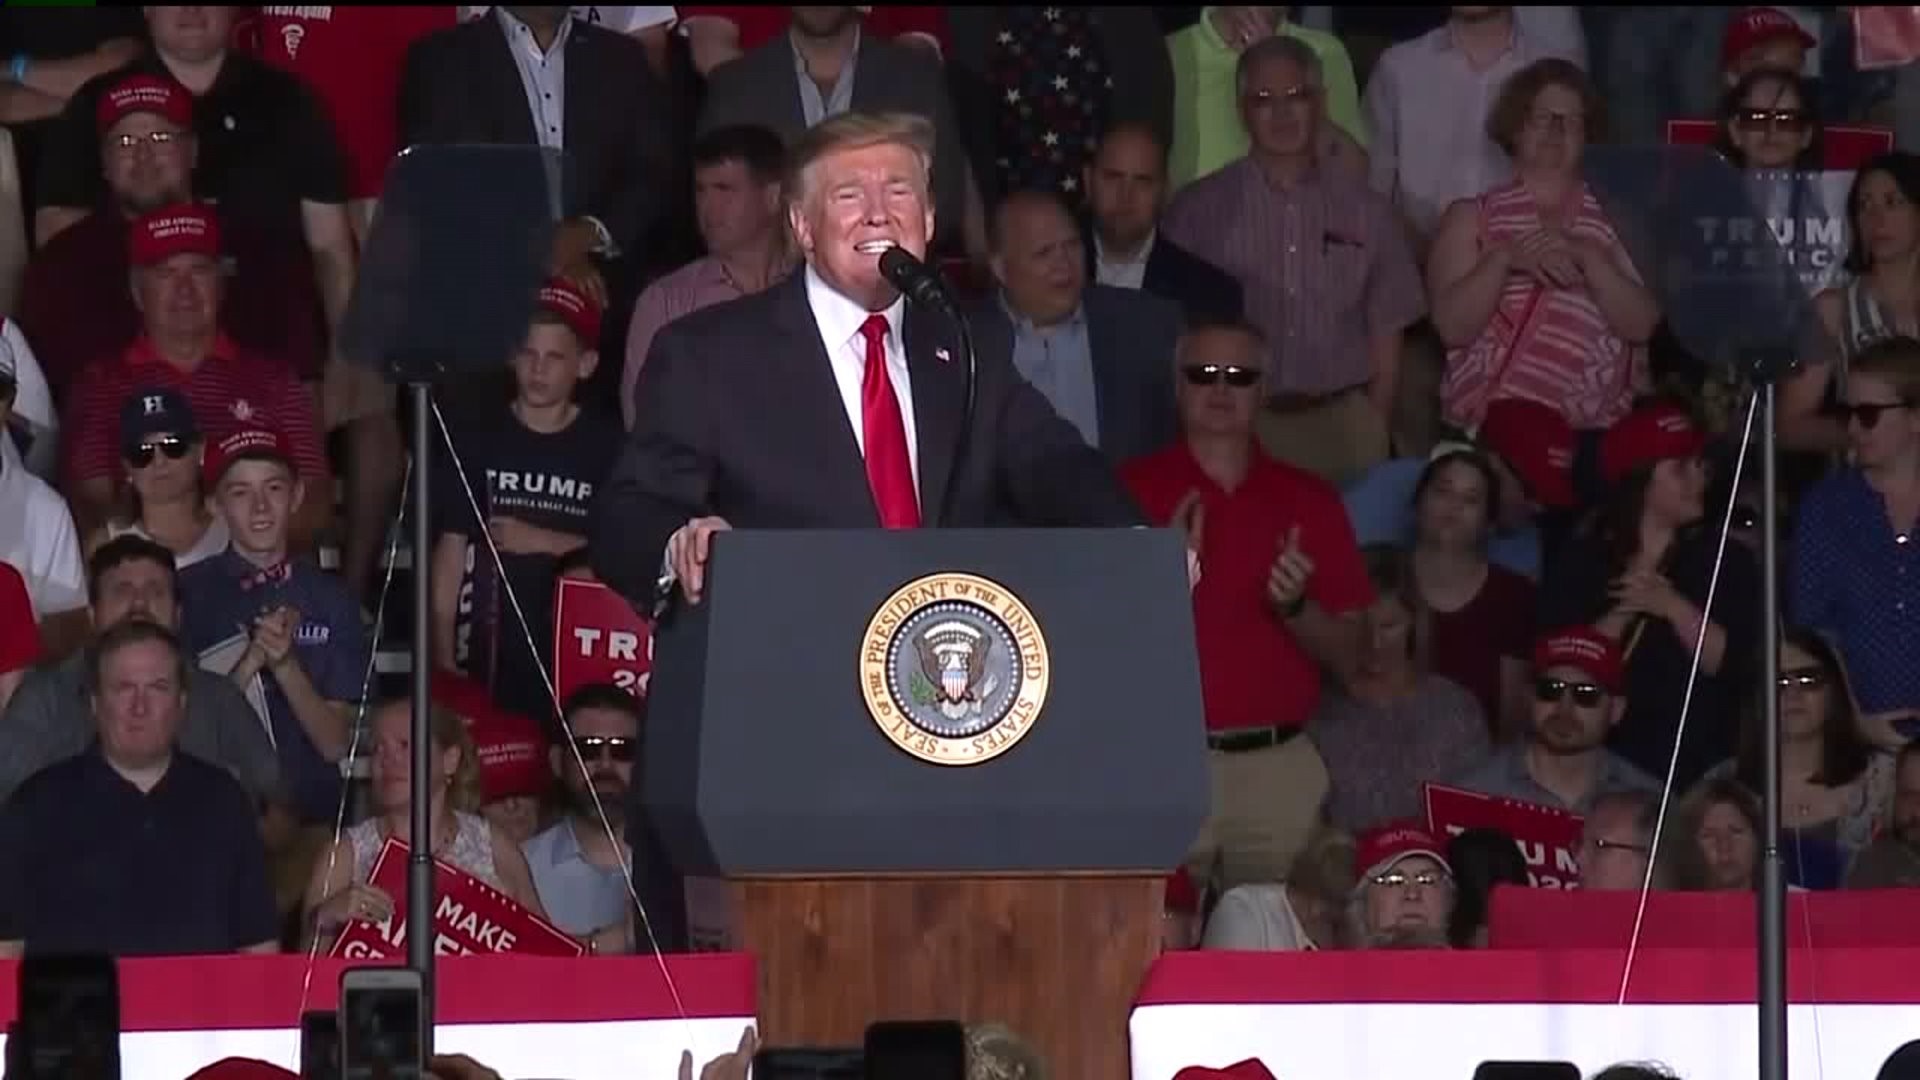 Thousands Attend Rally with President Trump